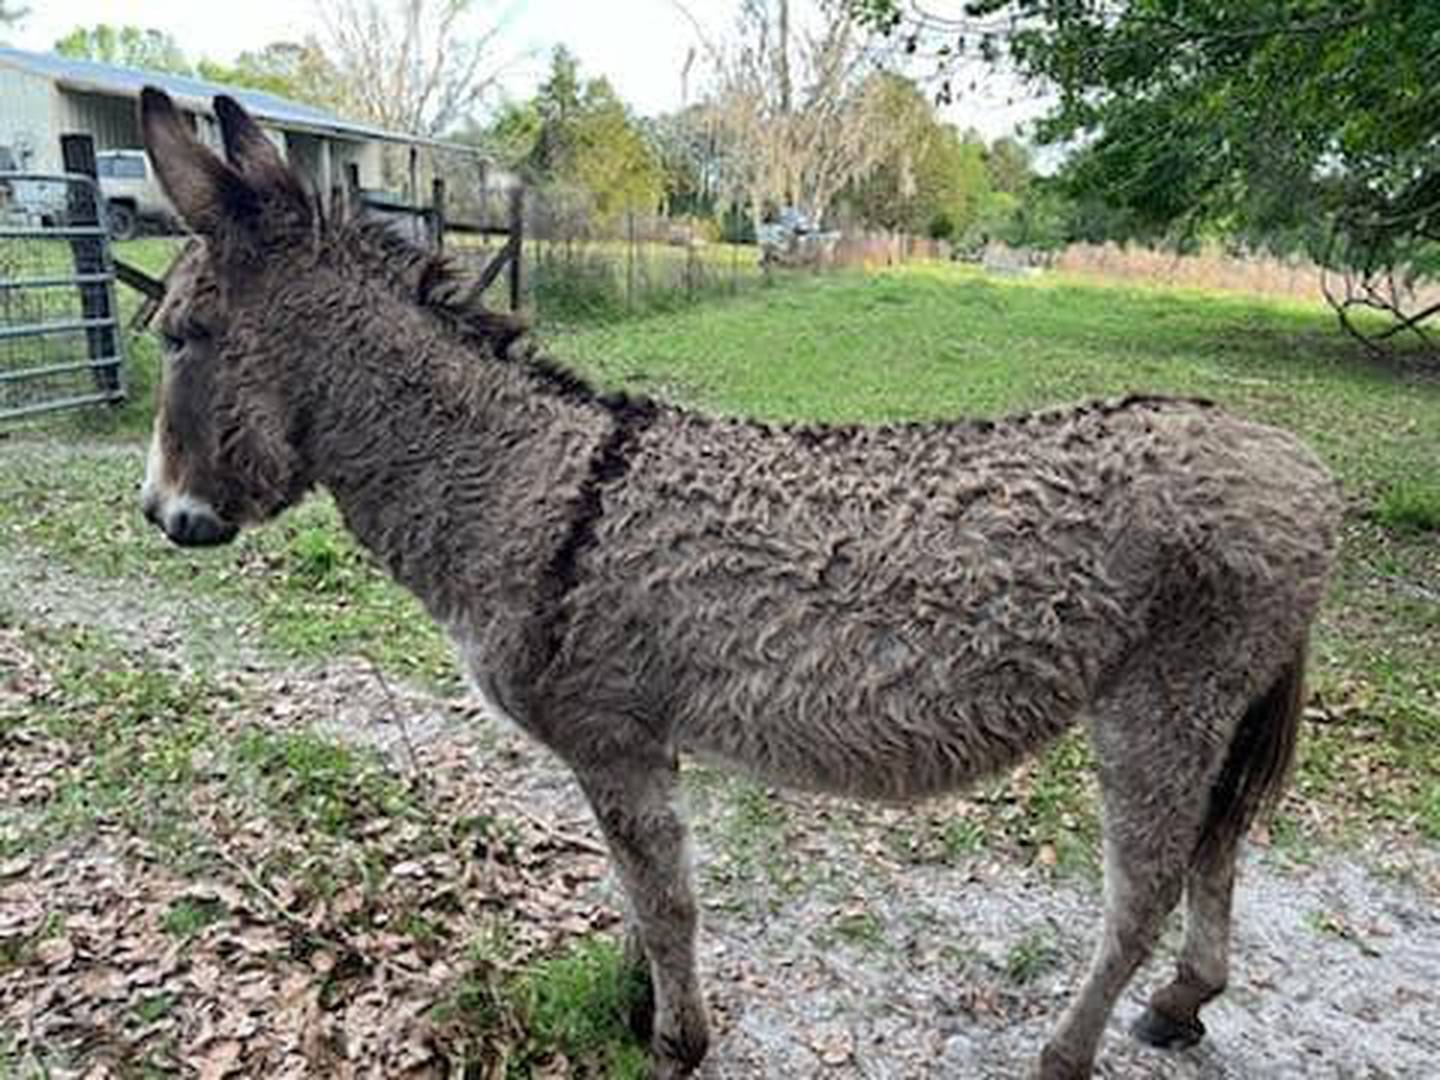 The donkey was found near Moore Road.